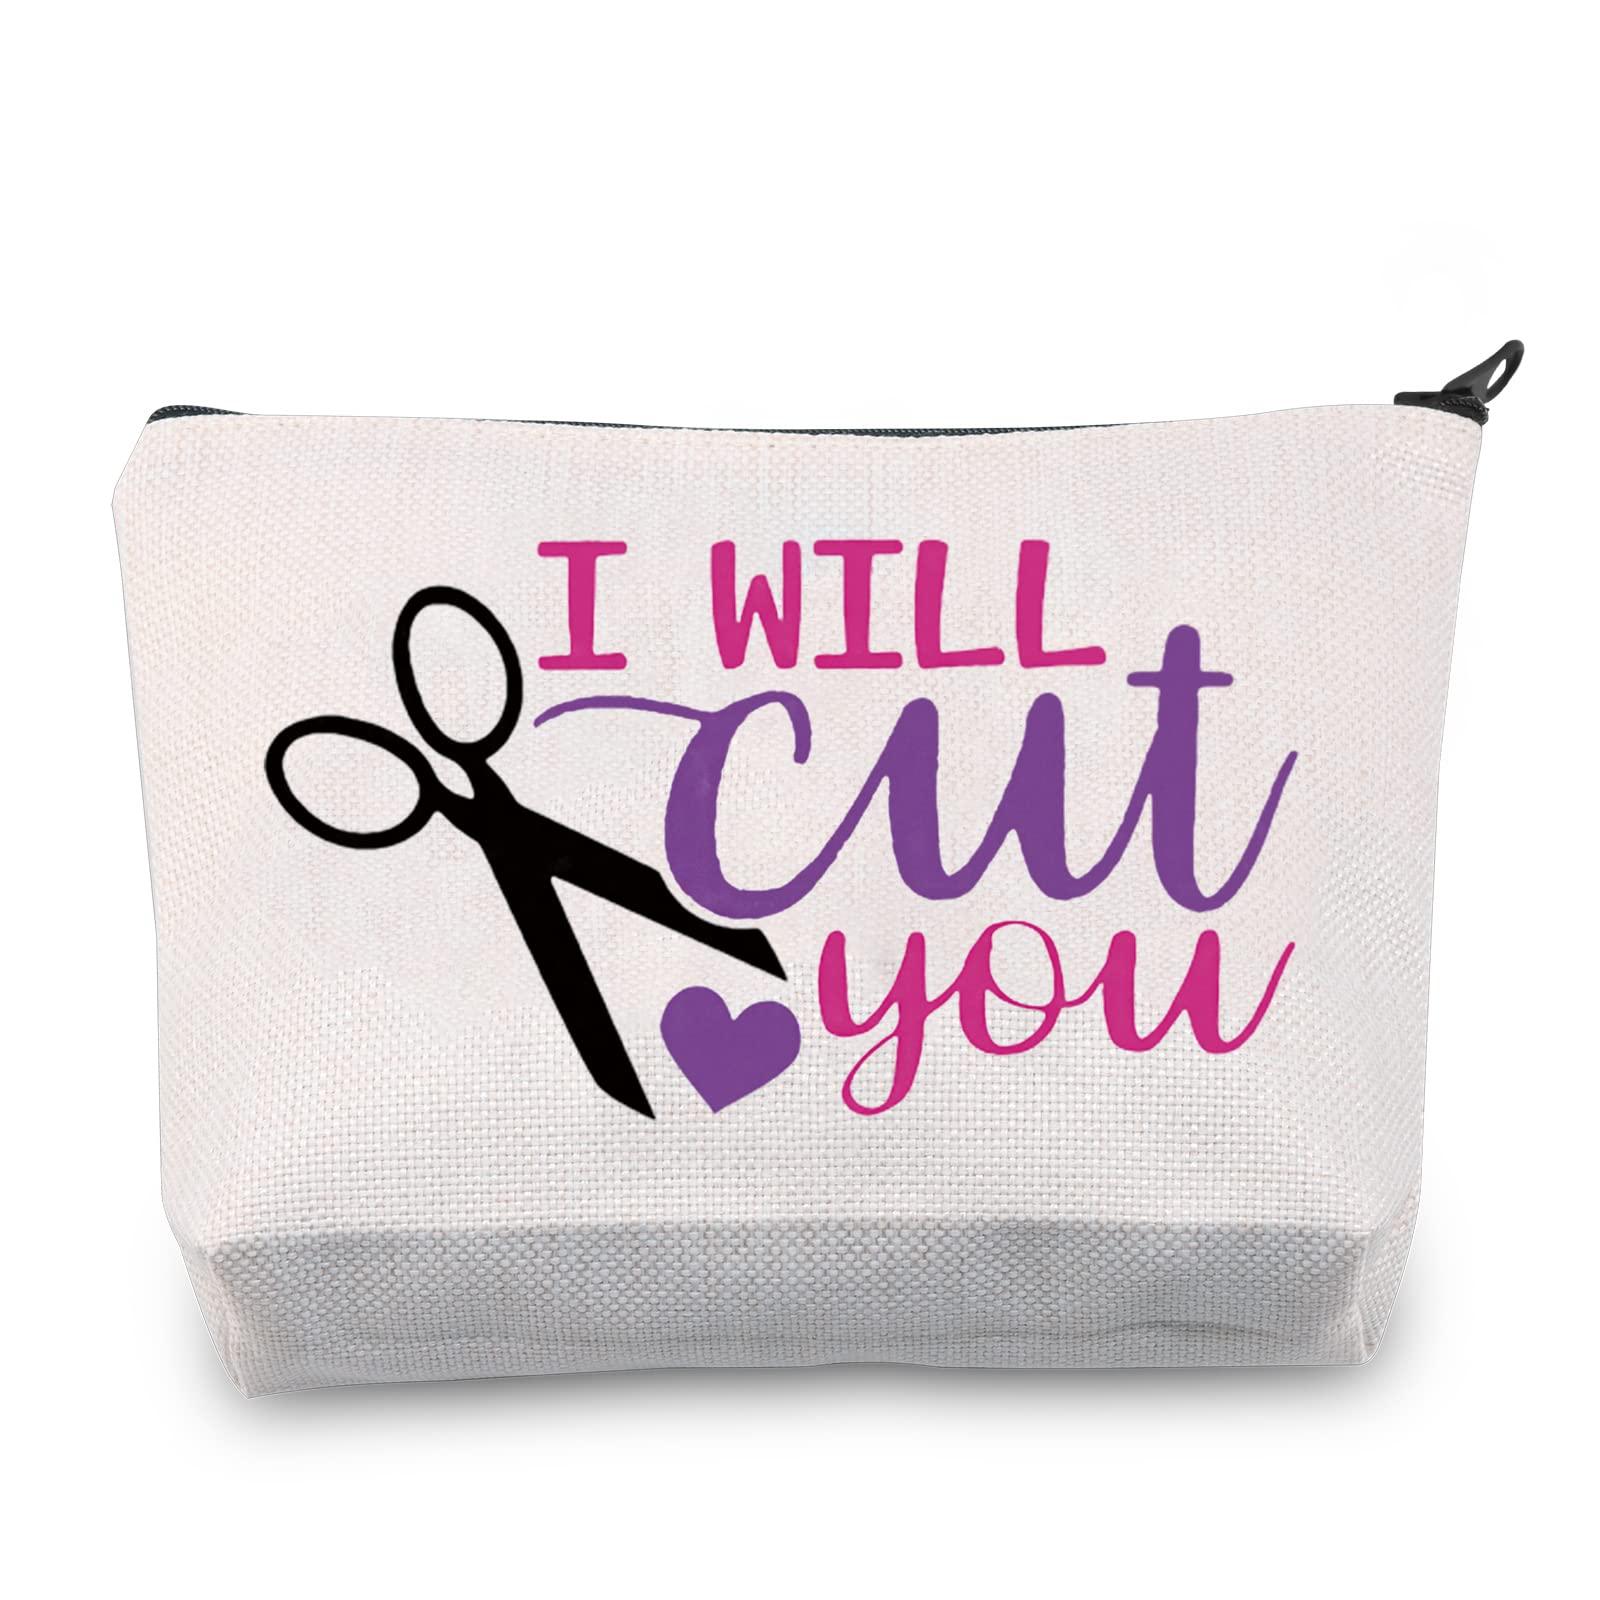 LEVLO Funny Hairdresser Gift Hair Stylist Makeup Bags I Will Cut You Zipper Makeup Bags Cosmetology Graduation Gift (I Will Cut You)